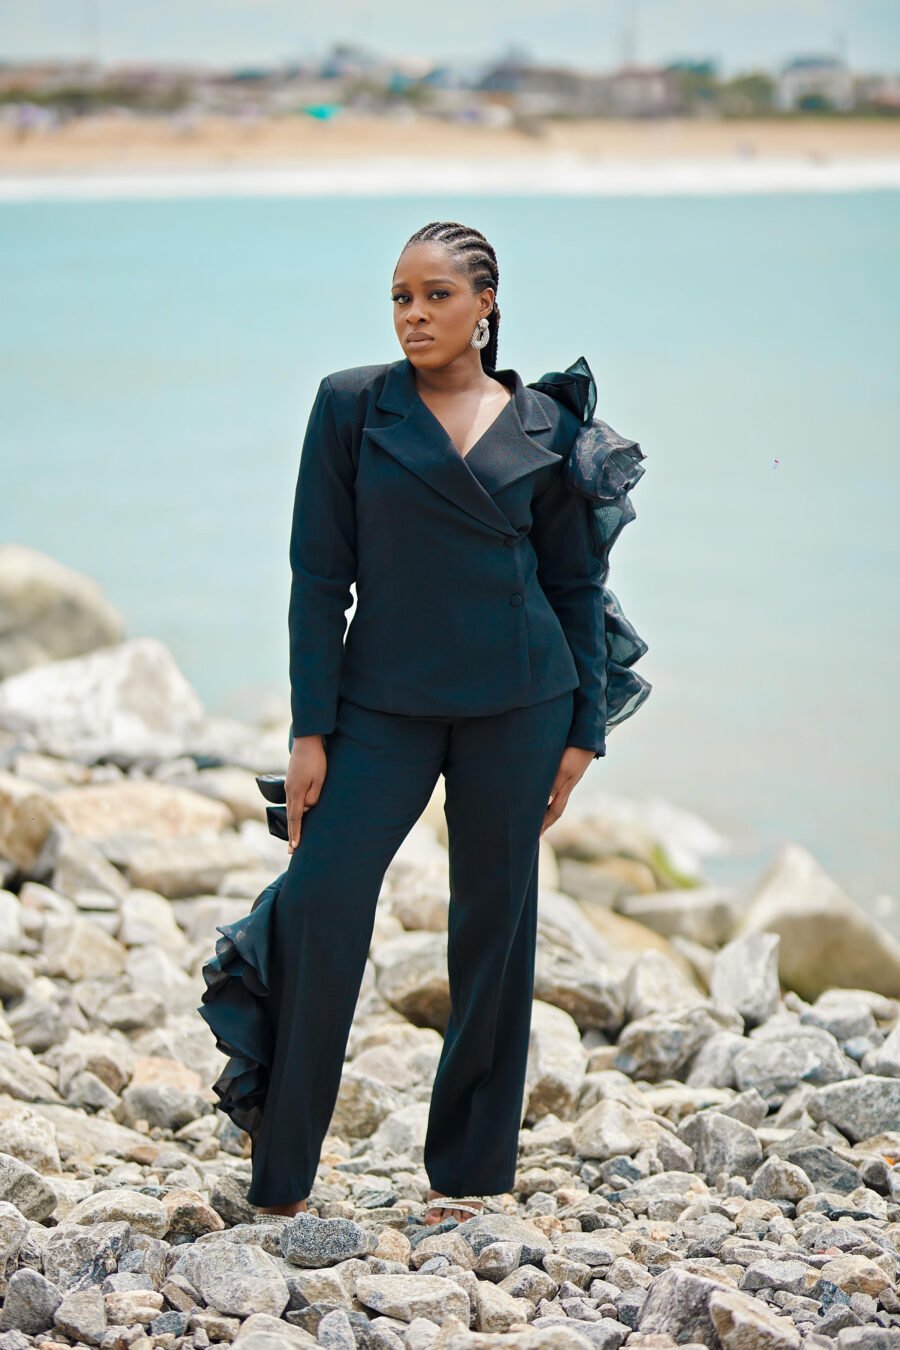 timeless fashion for women. black blazer set for the stylish CEO. Womens suits for work, workwear for women. Styling tips for Ceos